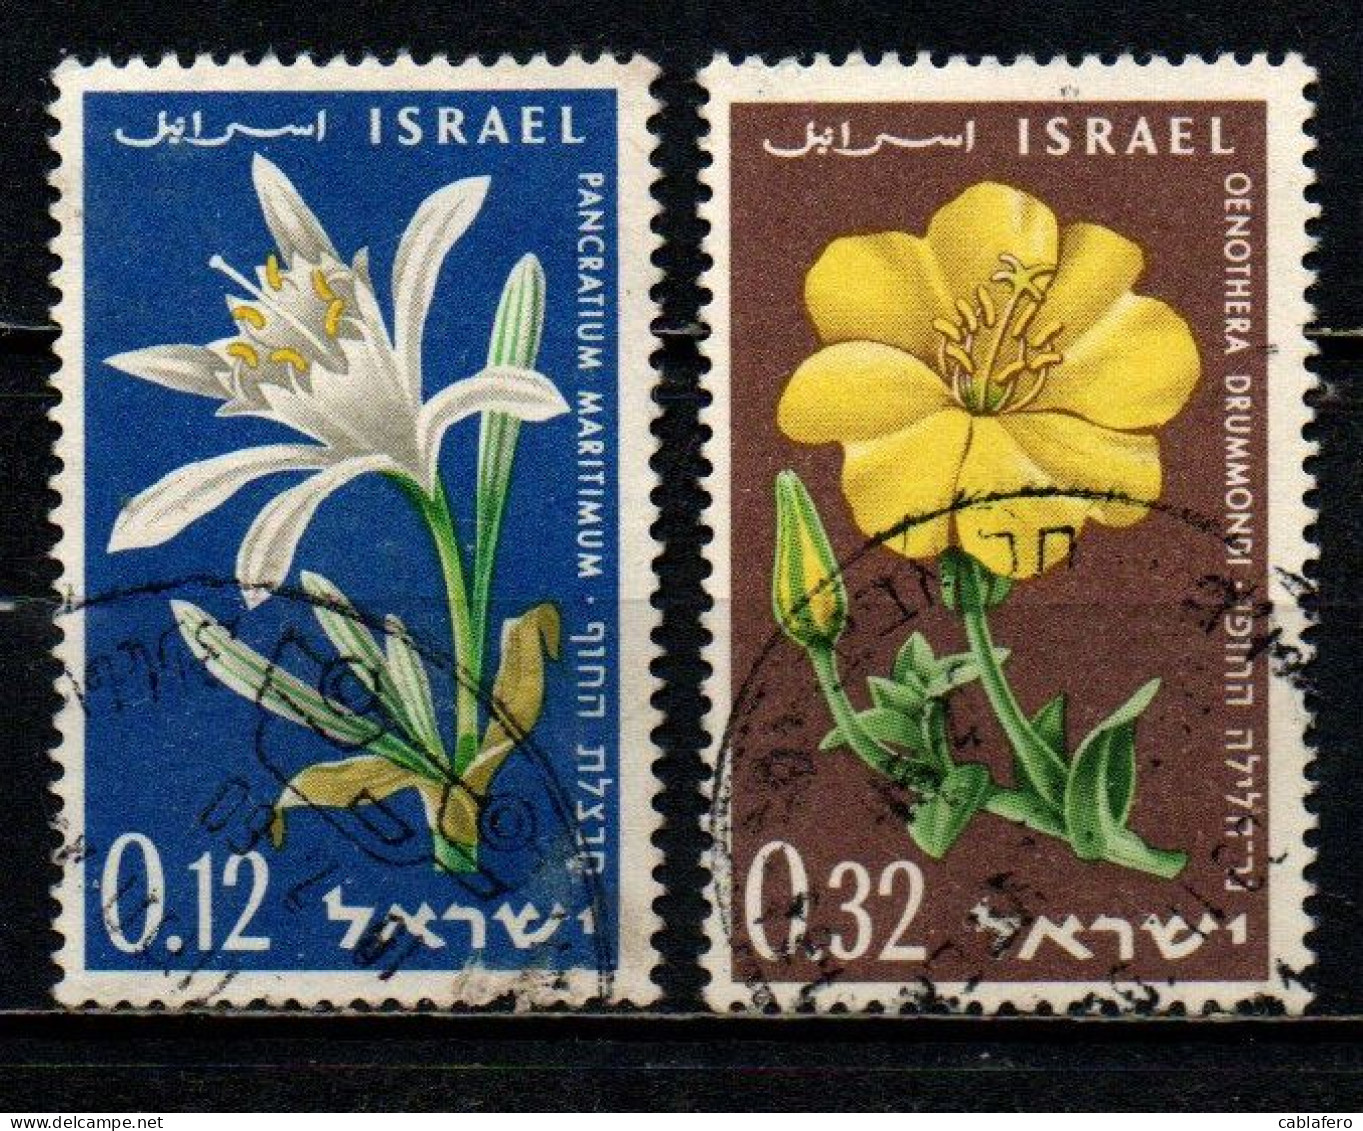 ISRAELE - 1960 - Sand Lily And Evening Primrose - Memorial Day; Proclamation Of State Of Israel, 12th Anniv - USATI - Oblitérés (sans Tabs)